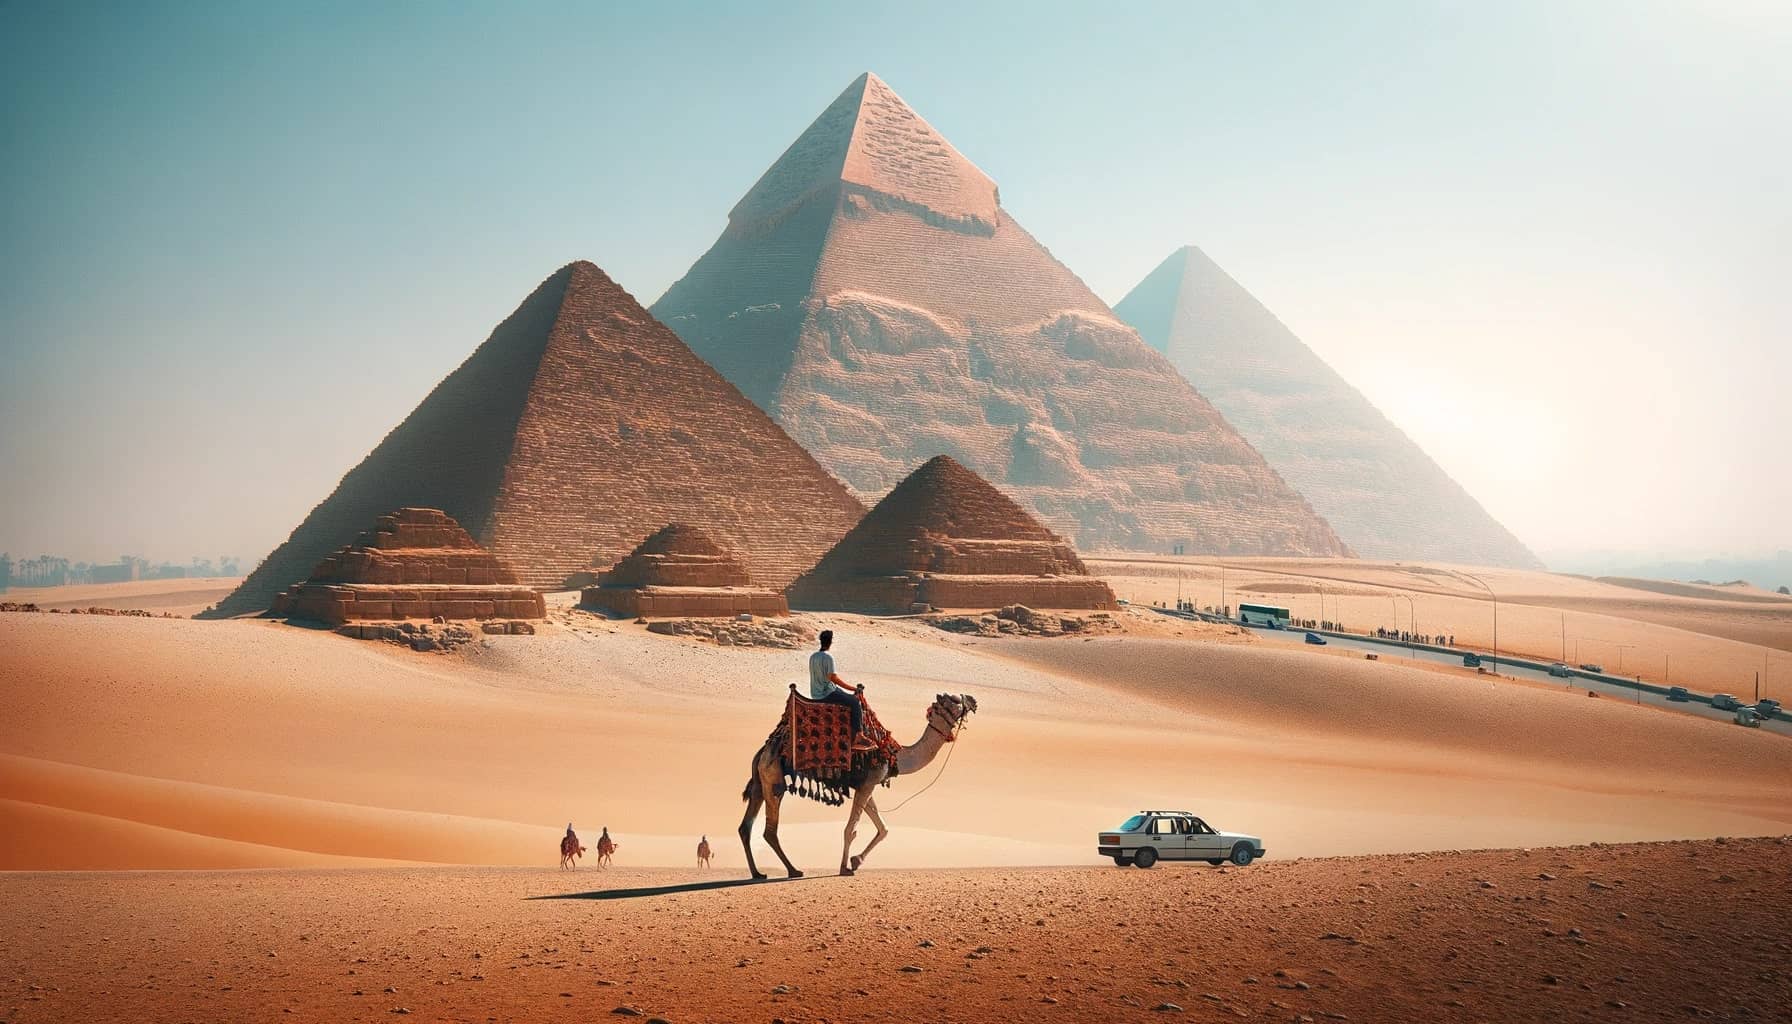 Great Pyramids of Giza on a bright day. In the foreground, there is a vast desert with a person riding a camel